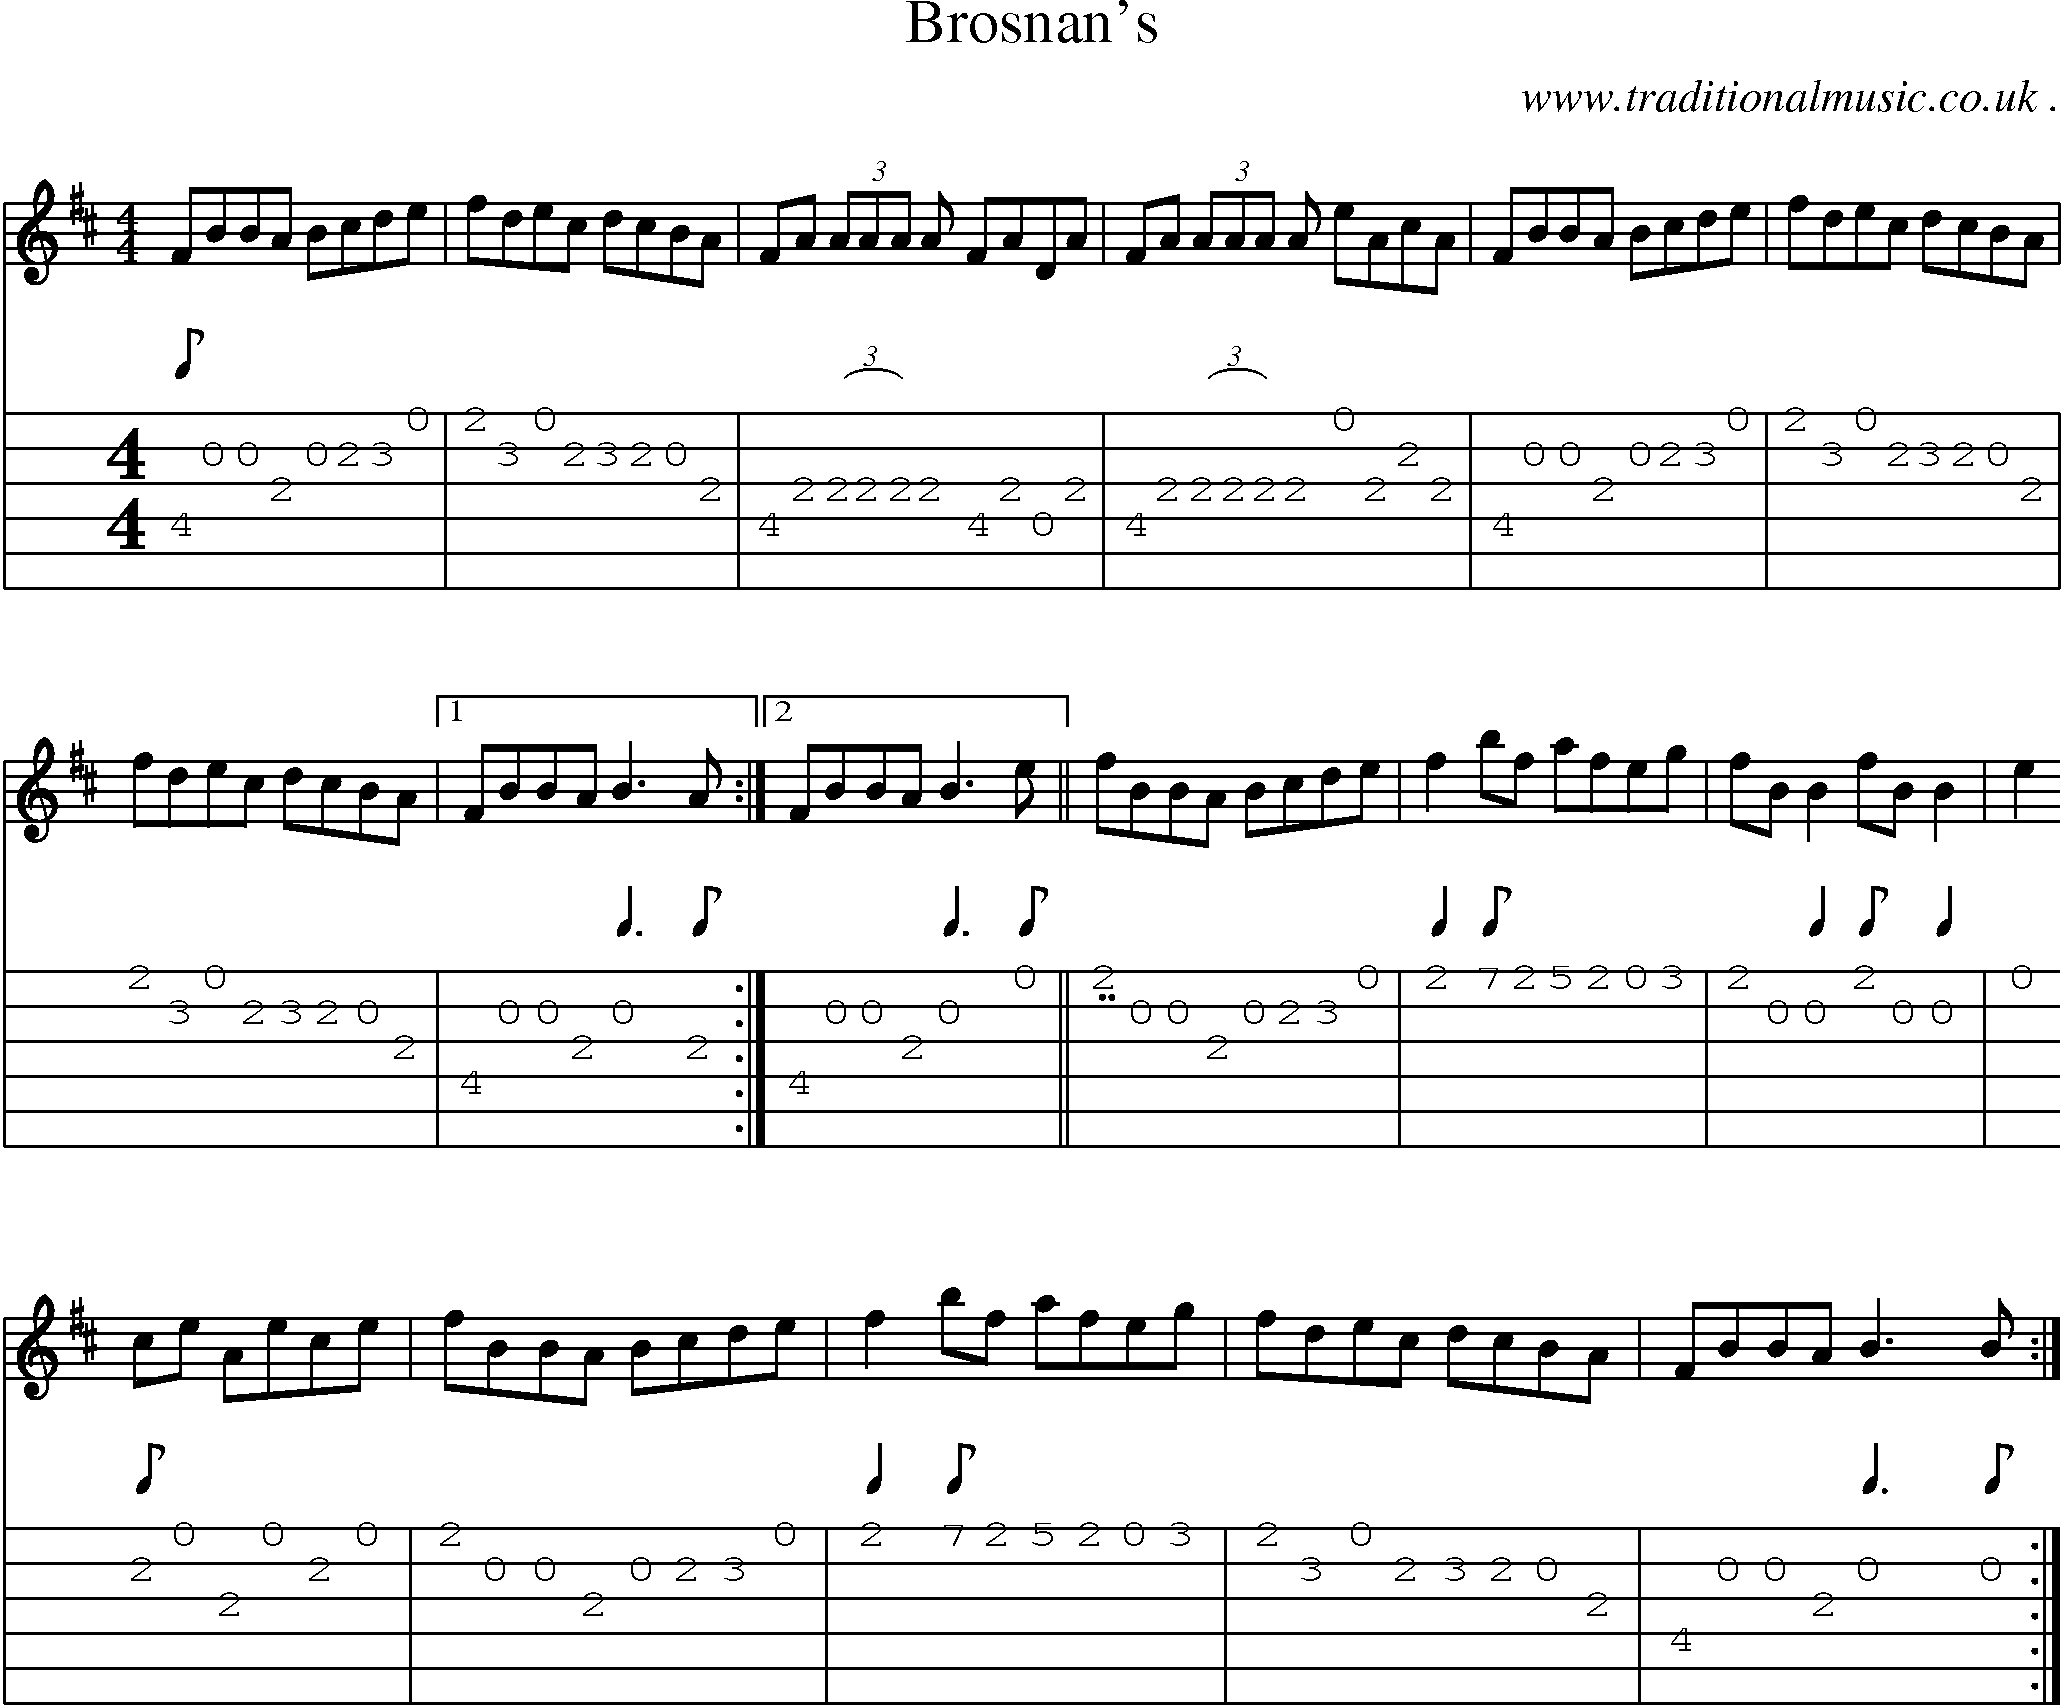 Sheet-Music and Guitar Tabs for Brosnans